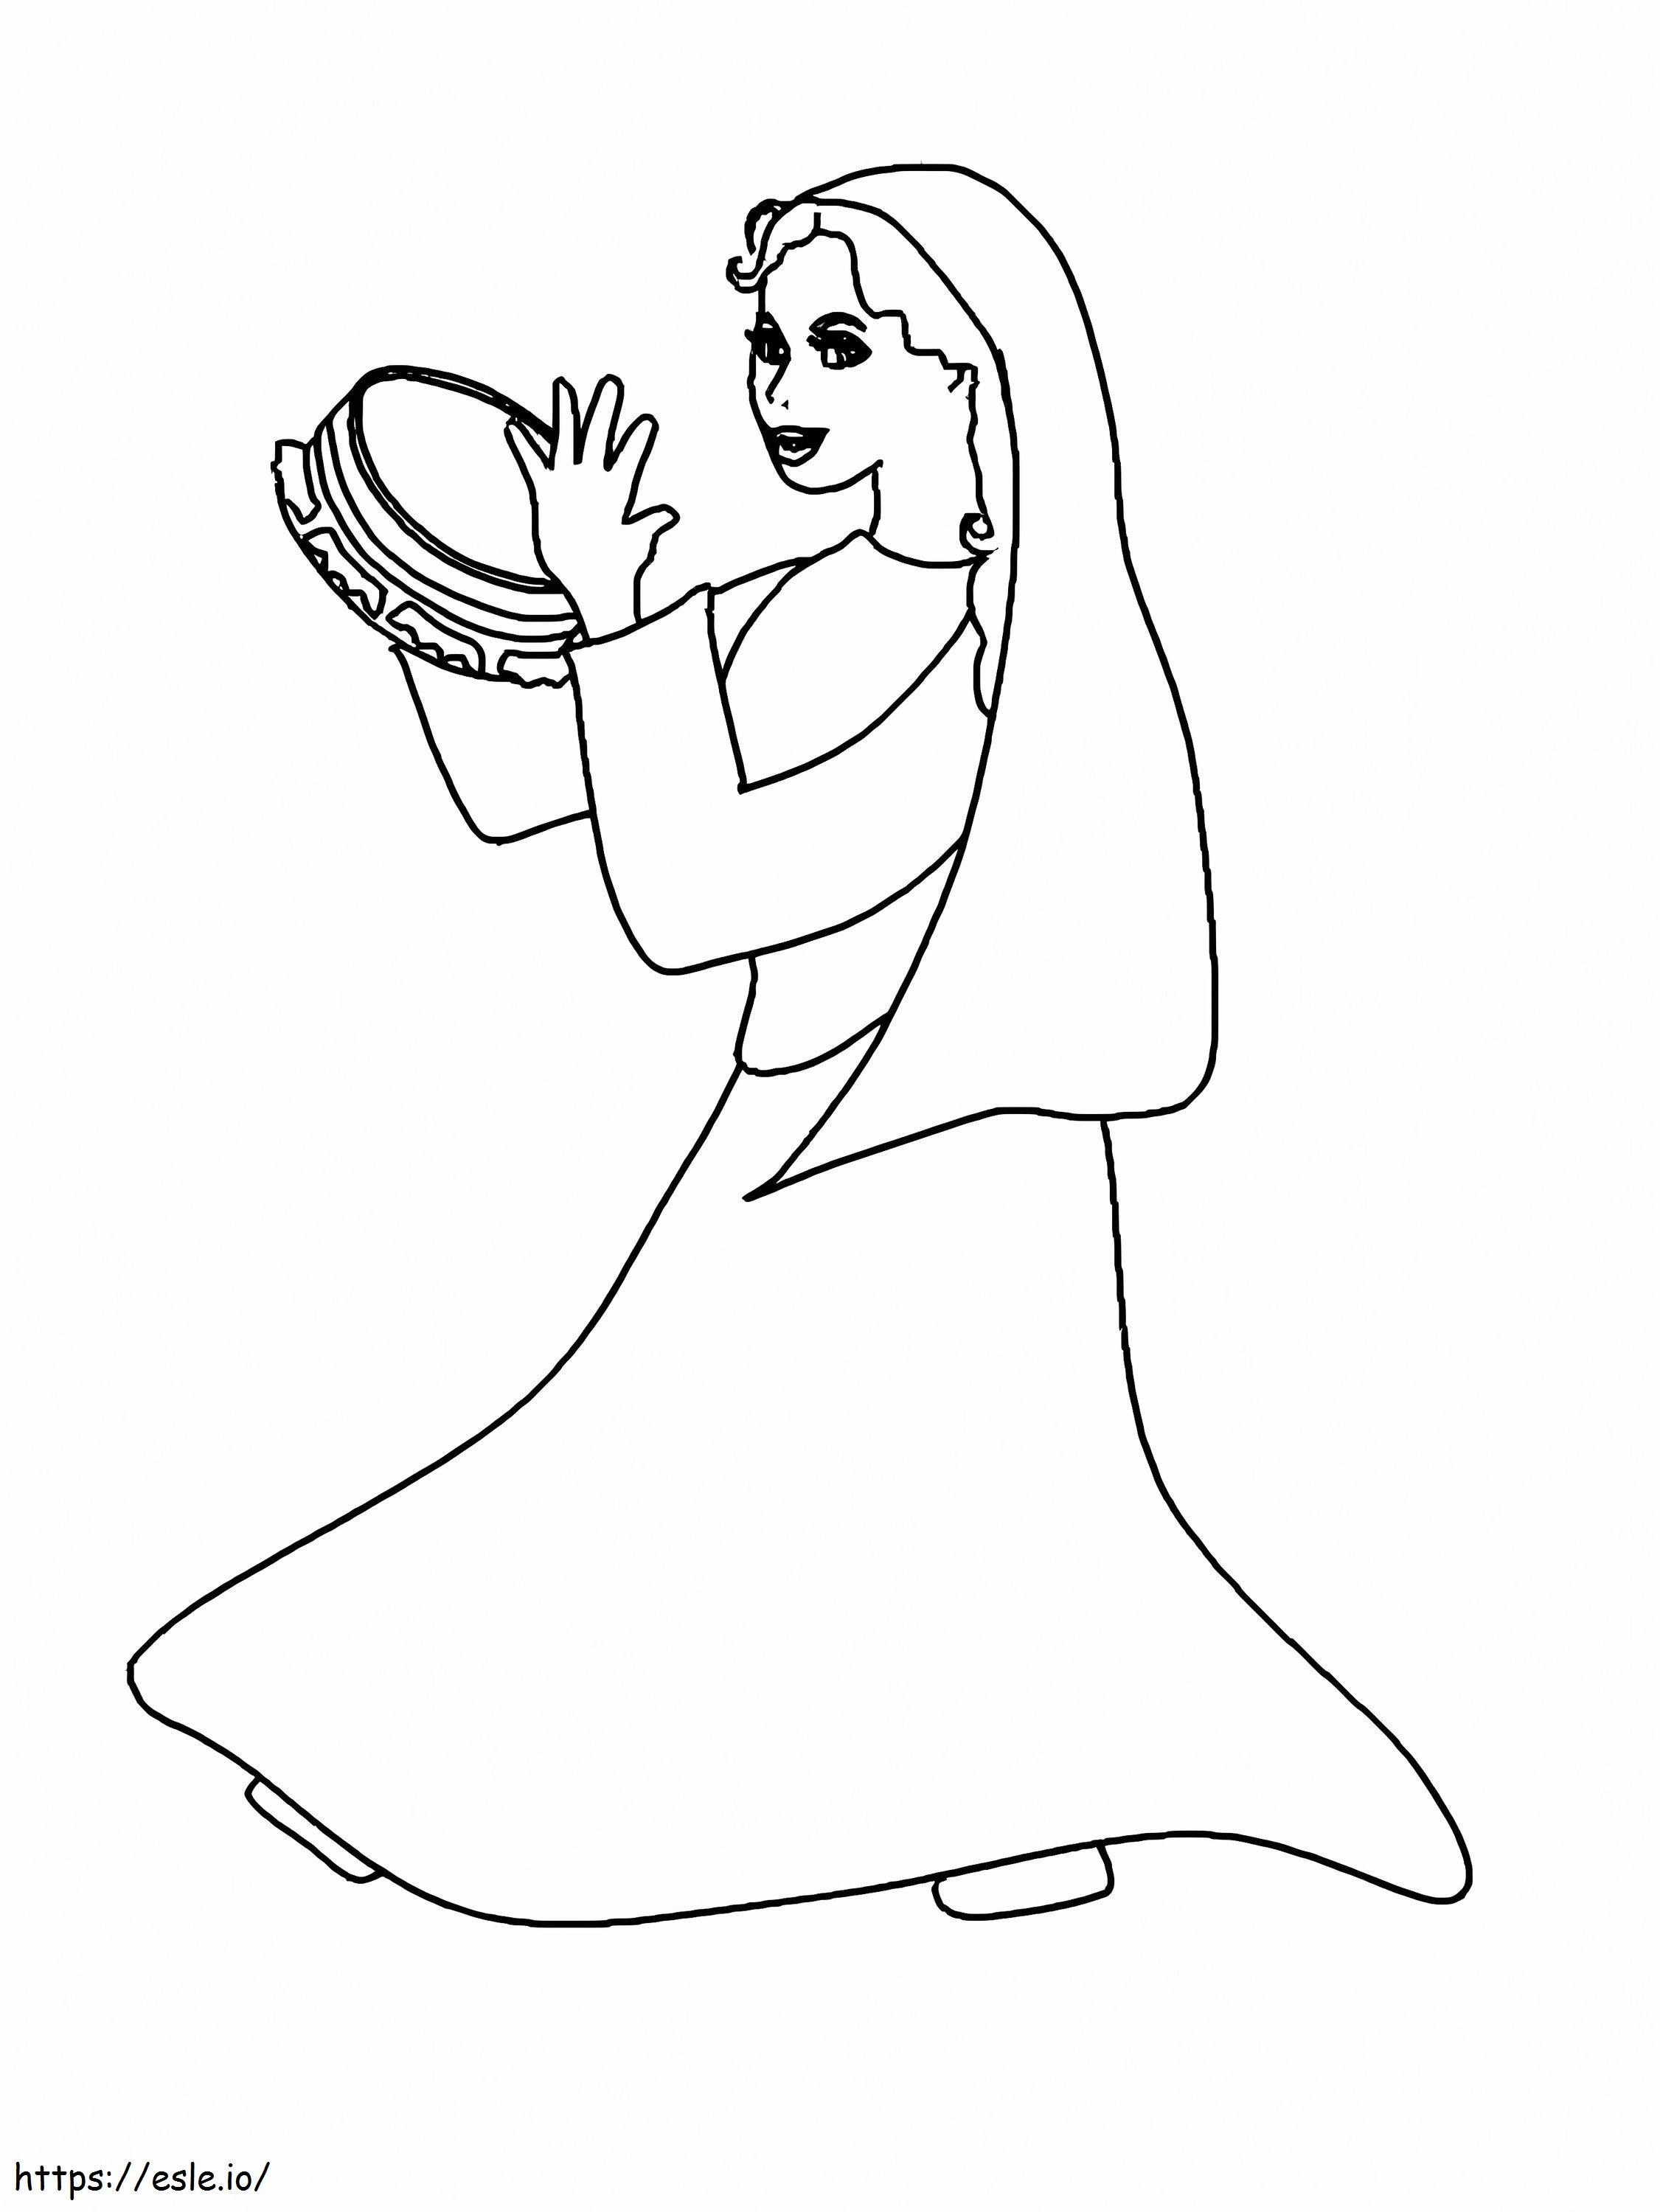 Playing Tambourine coloring page